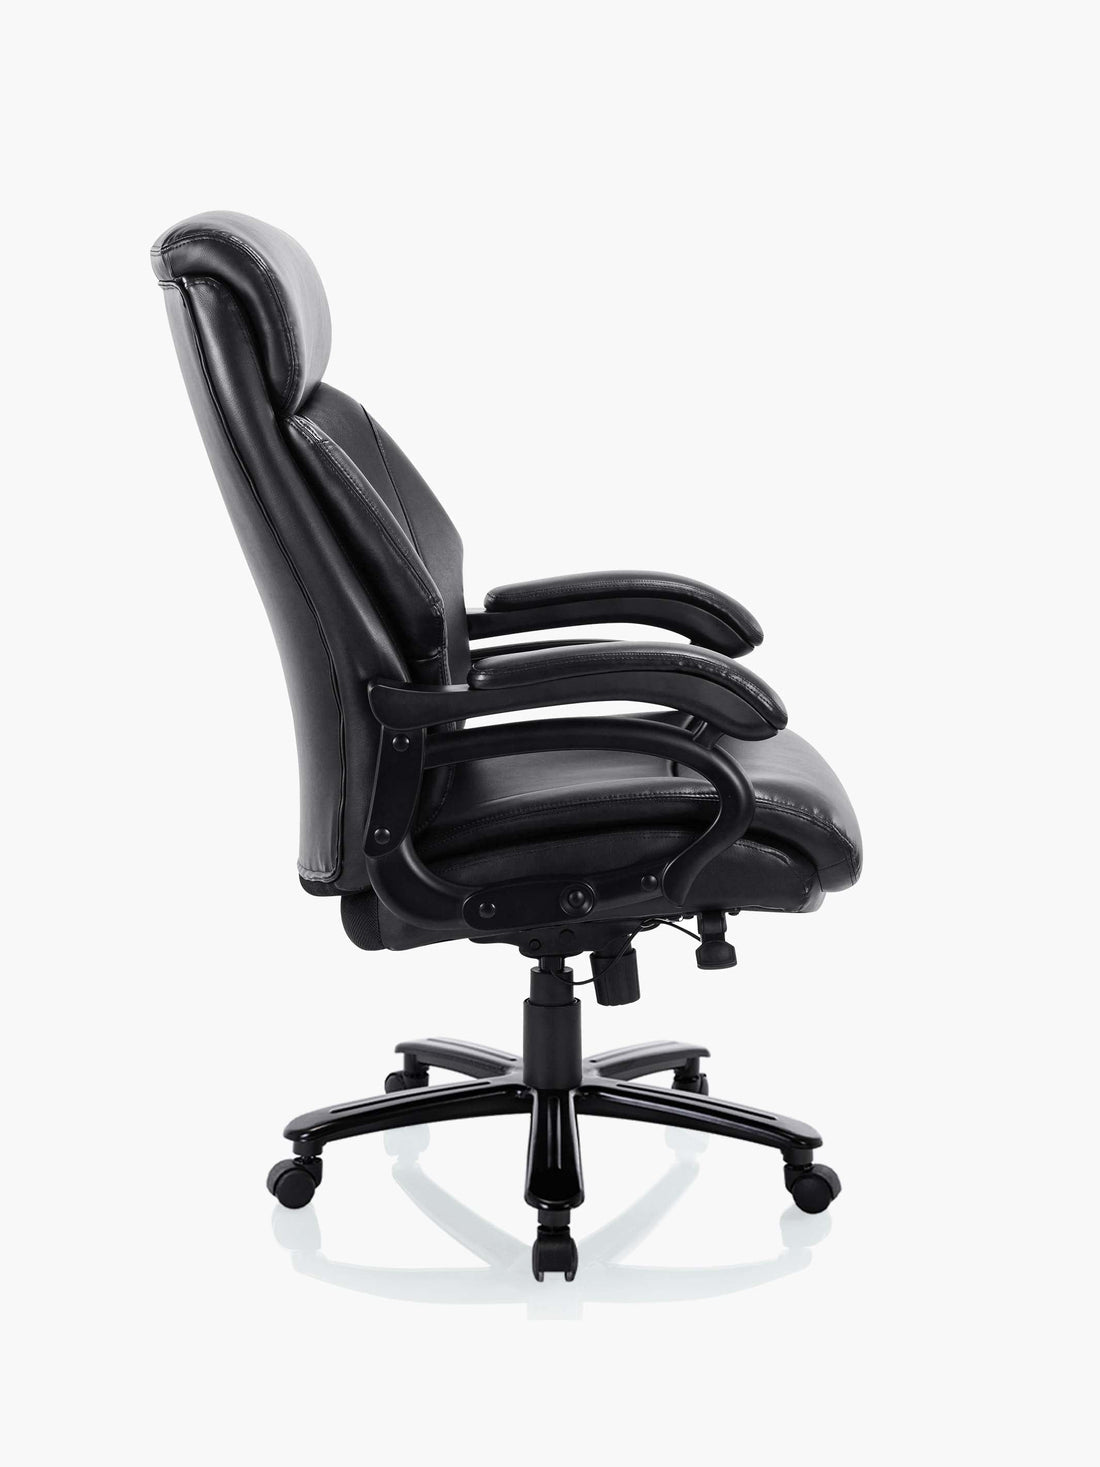 Executive Big and Tall 400lbs PU Leather Office Chair